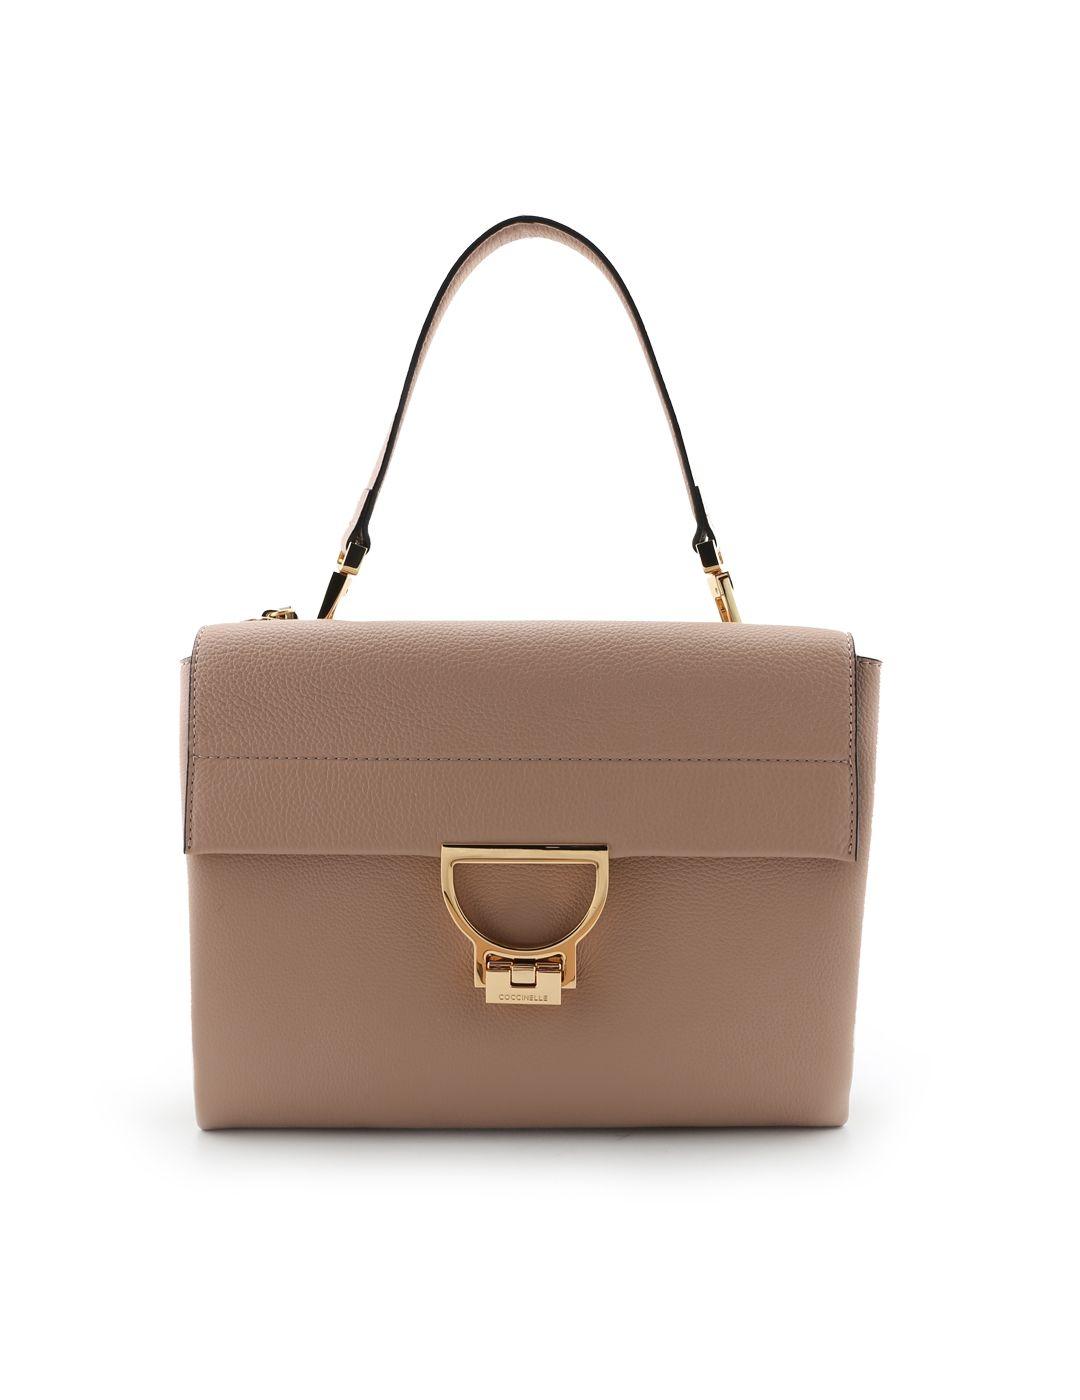 Coccinelle Brown Leather Handbag in Brown - Lyst